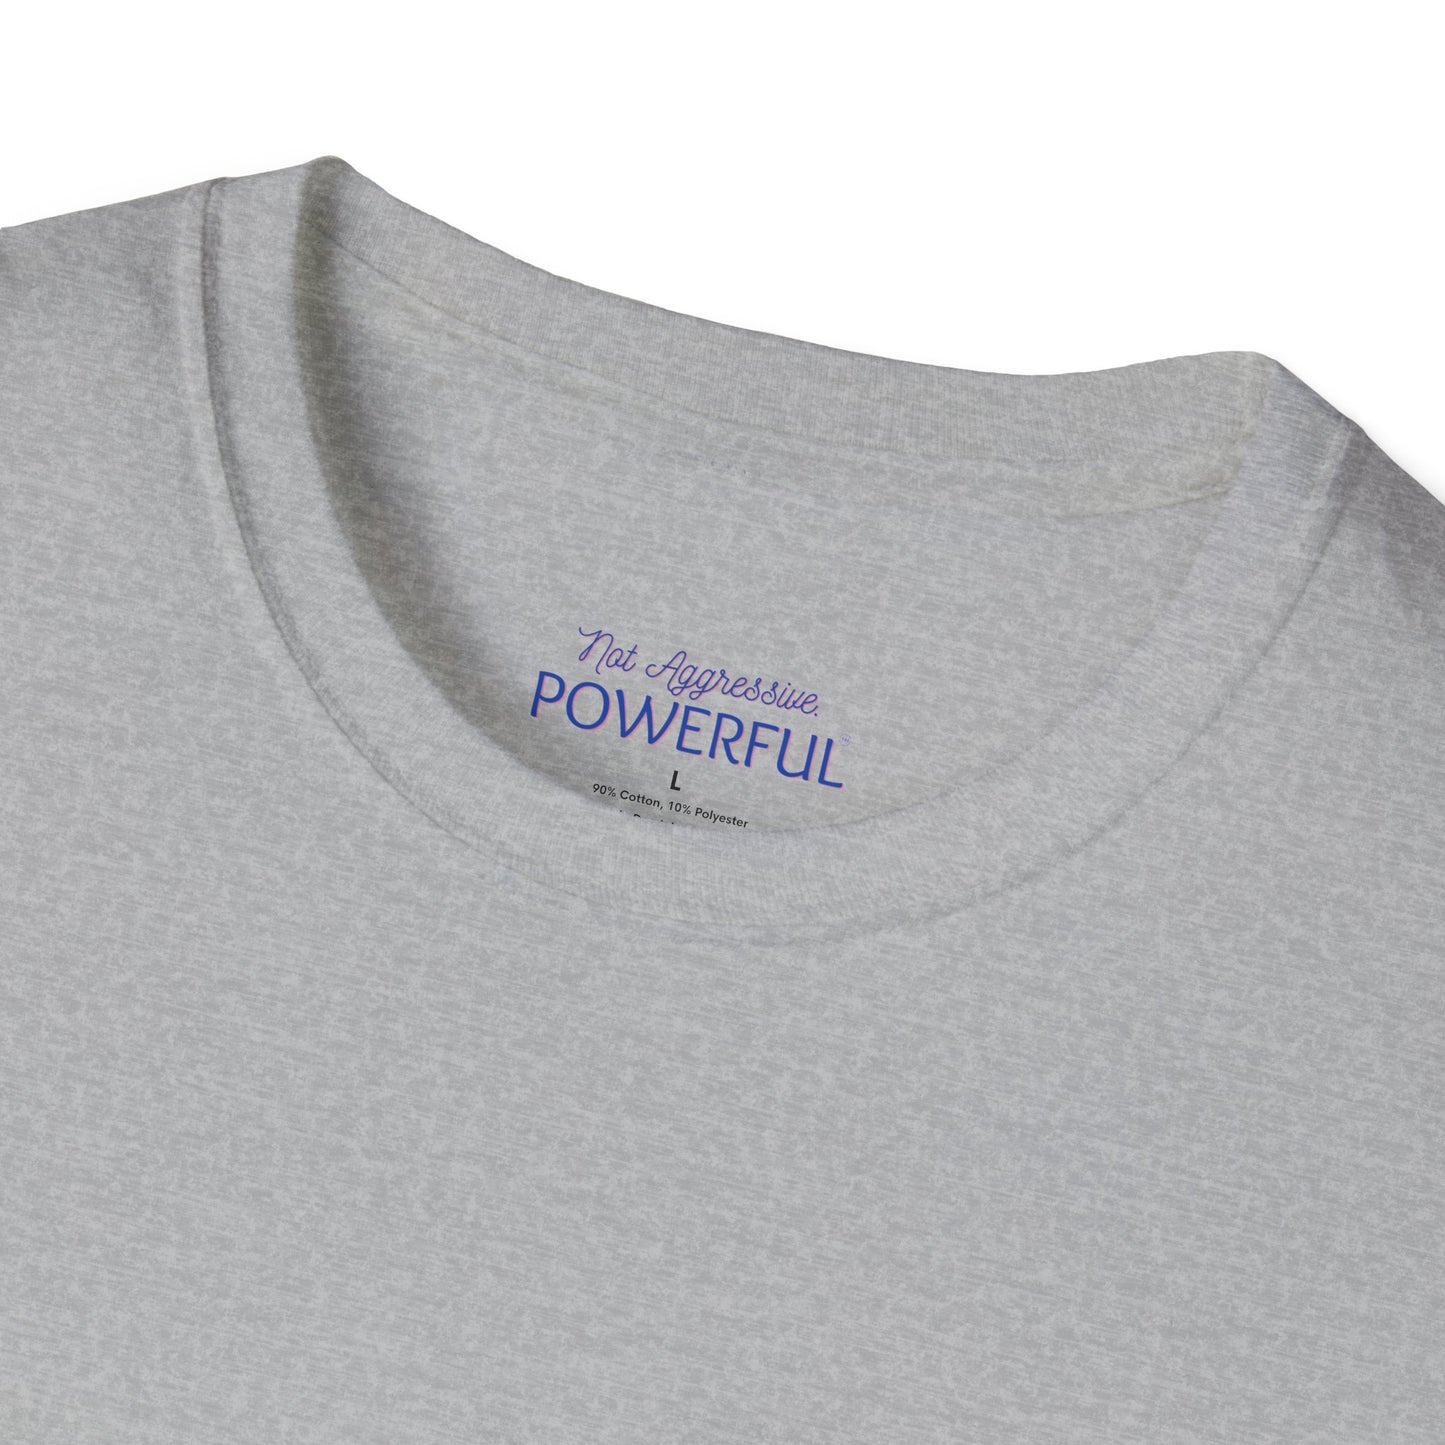 Quiet the mind Not Aggressive. POWERFUL™️ Mindfulness Eurofit Unisex Softstyle T-Shirt